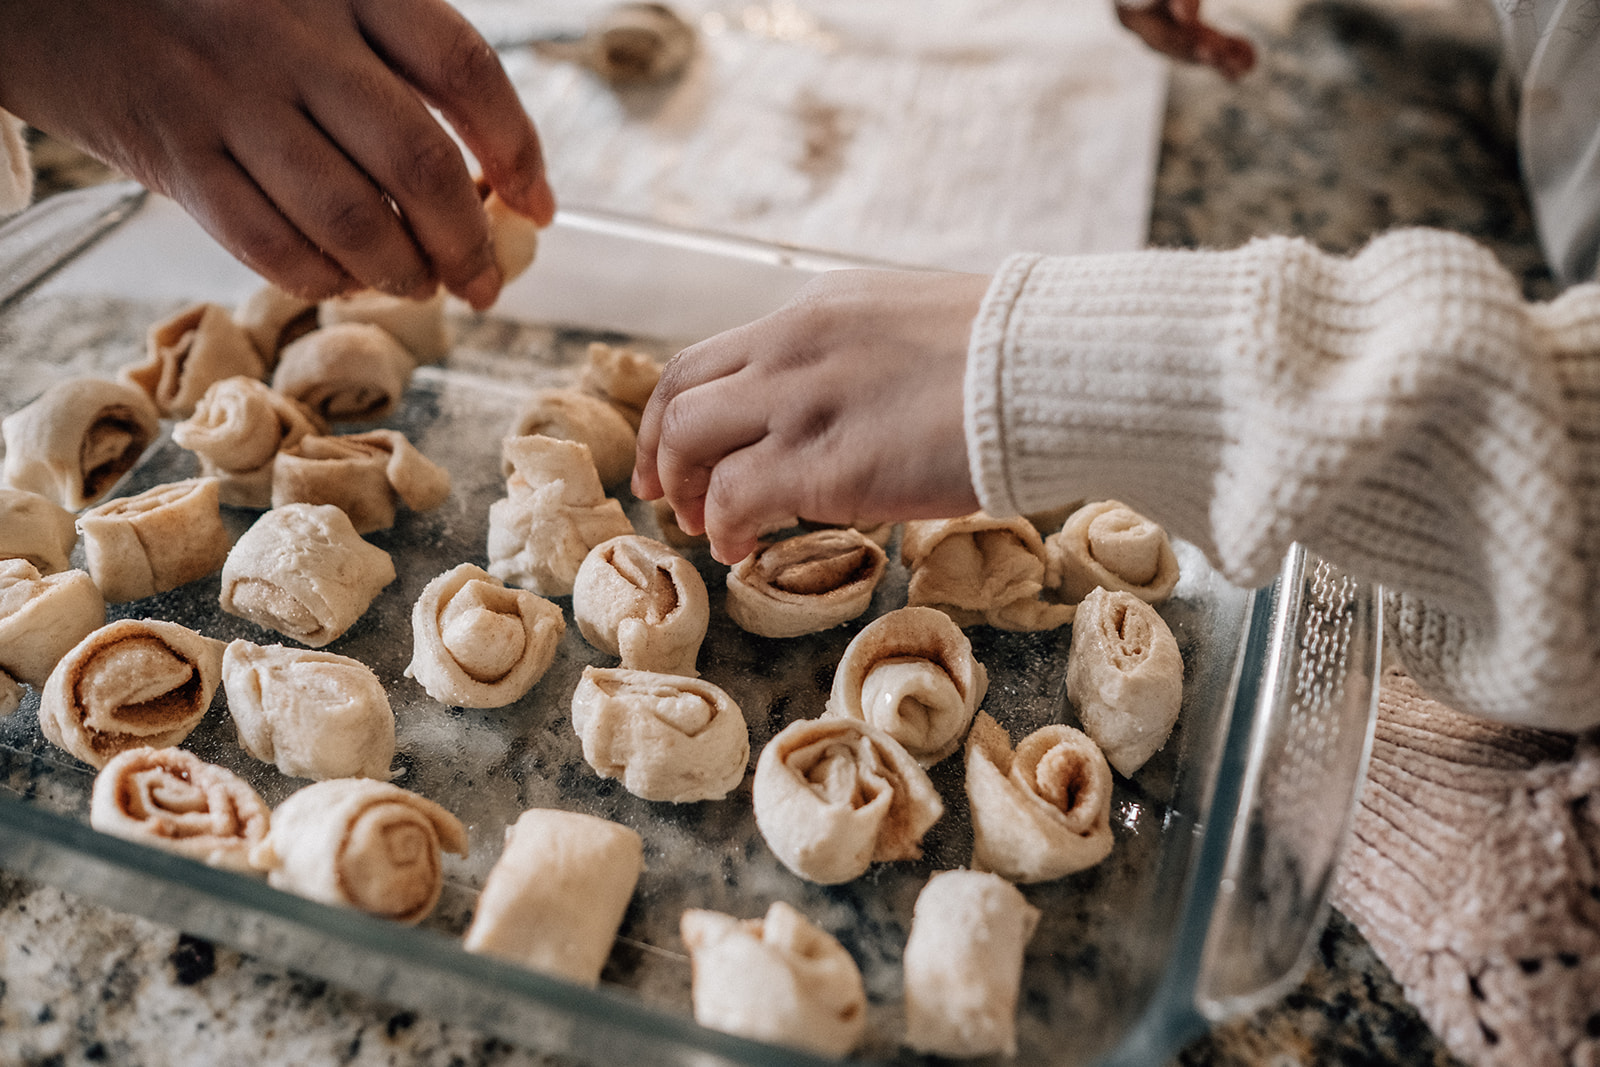 Baking cinnamon rolls with family 